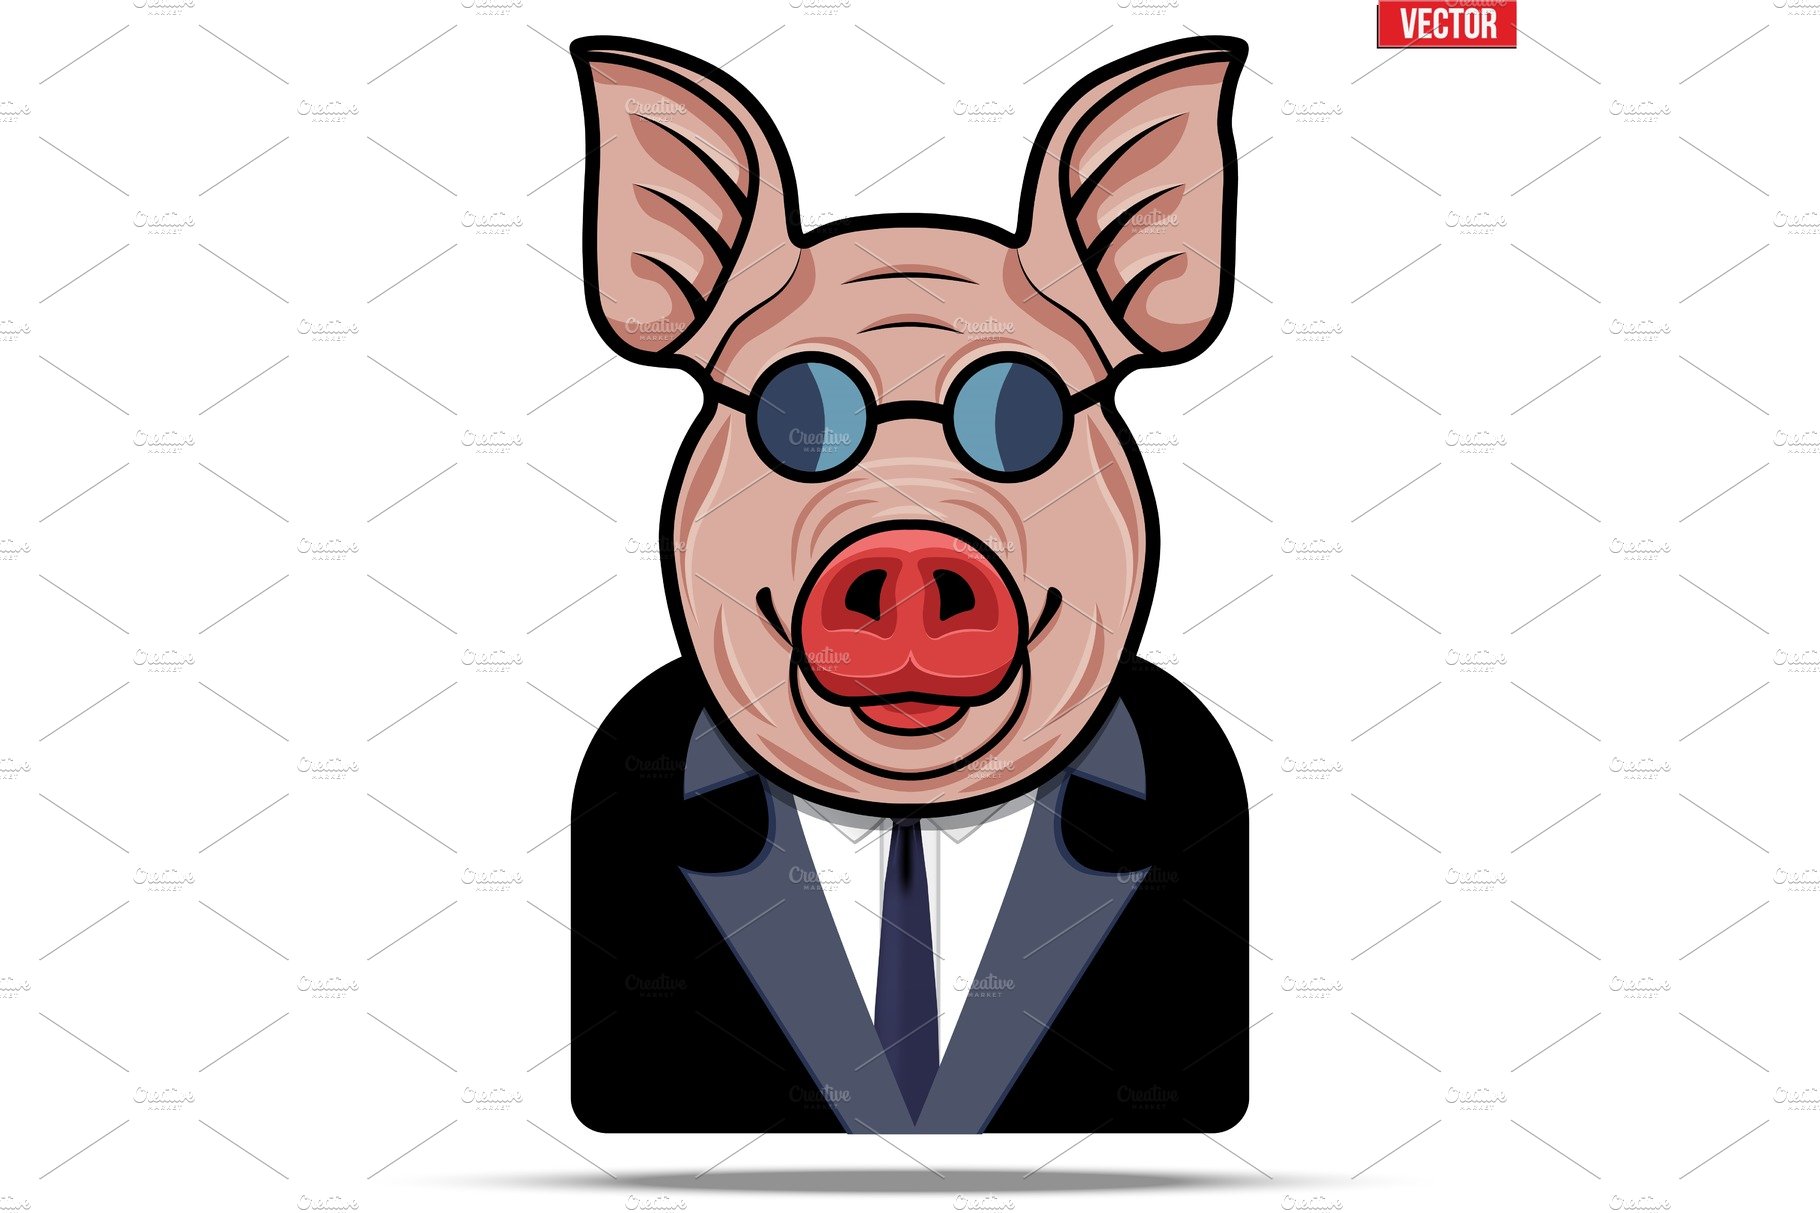 Pig in a suit and glasses cover image.